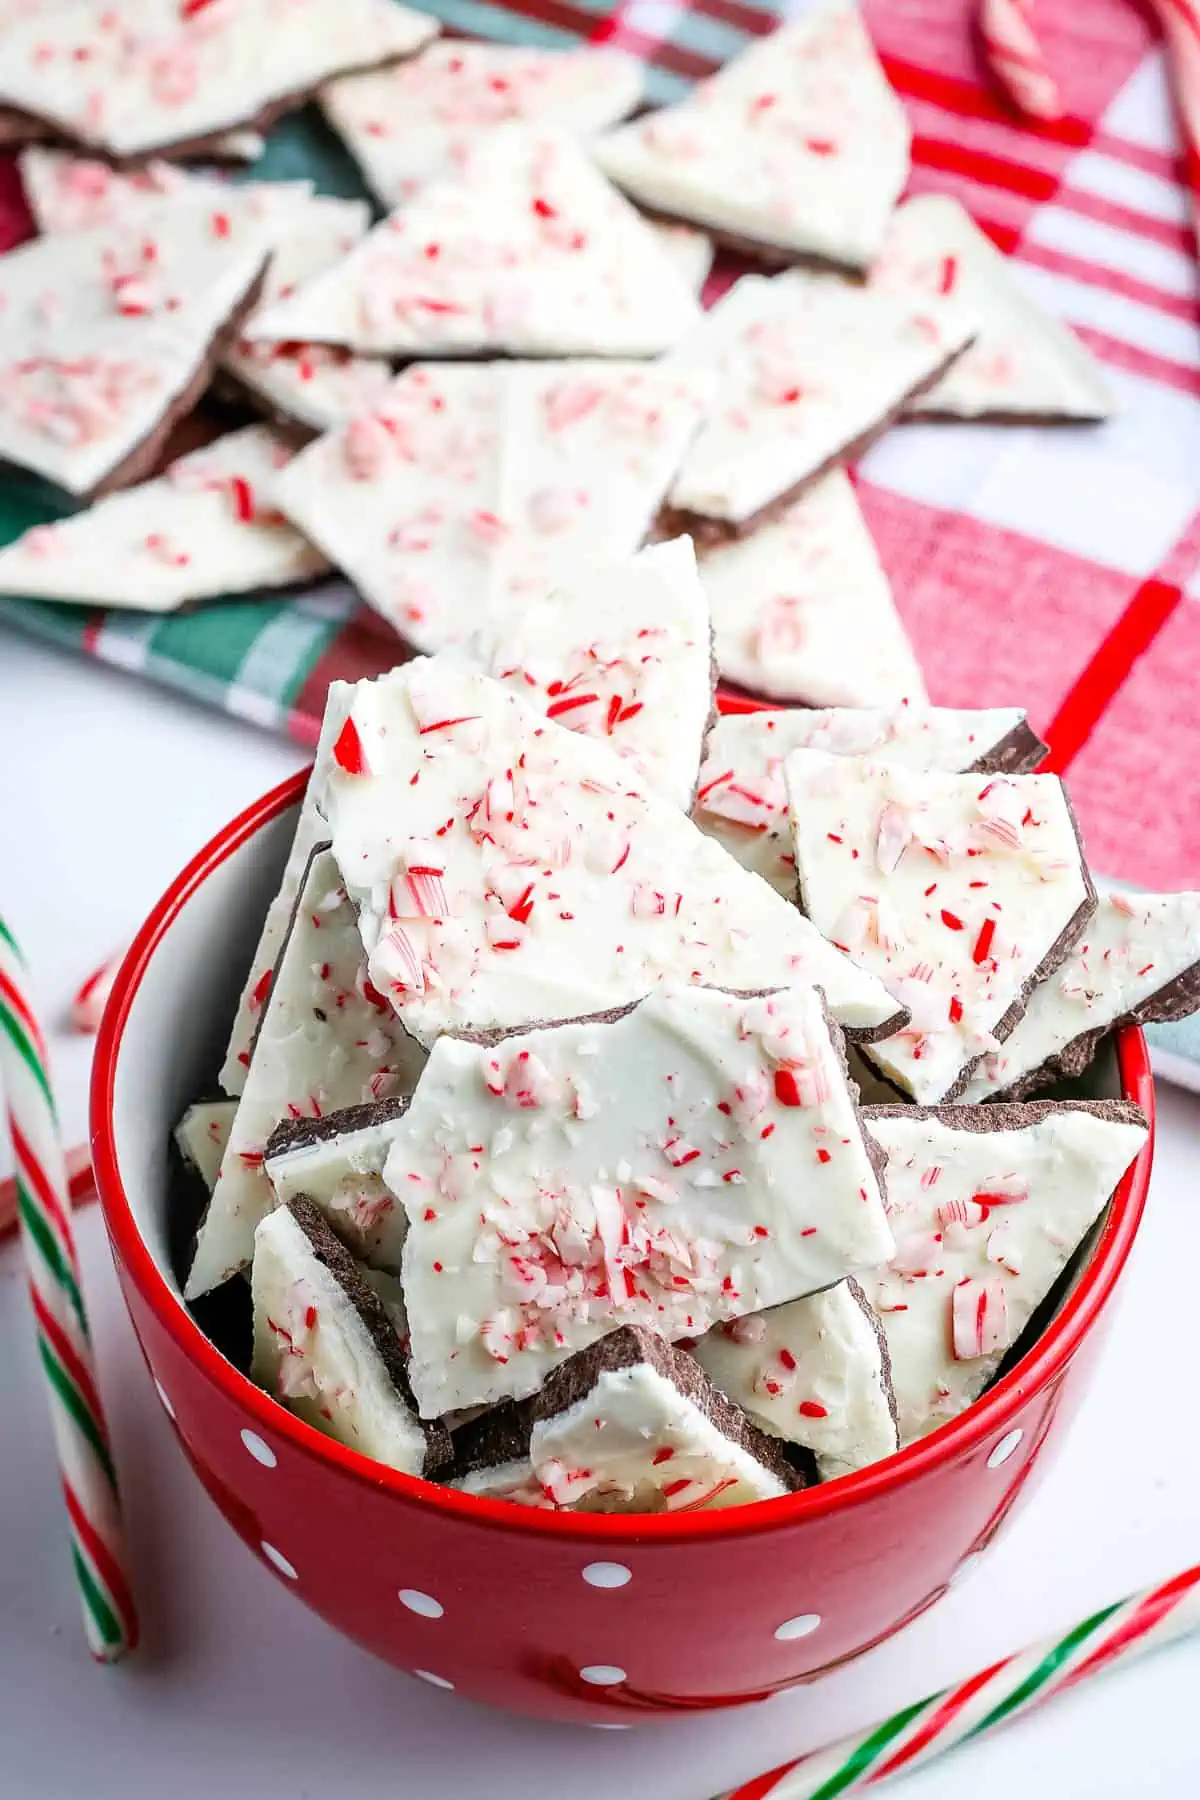 pile of white chocolate peppermint bark in red bowl and on plaid Christmas towel on white countertop with candy canes